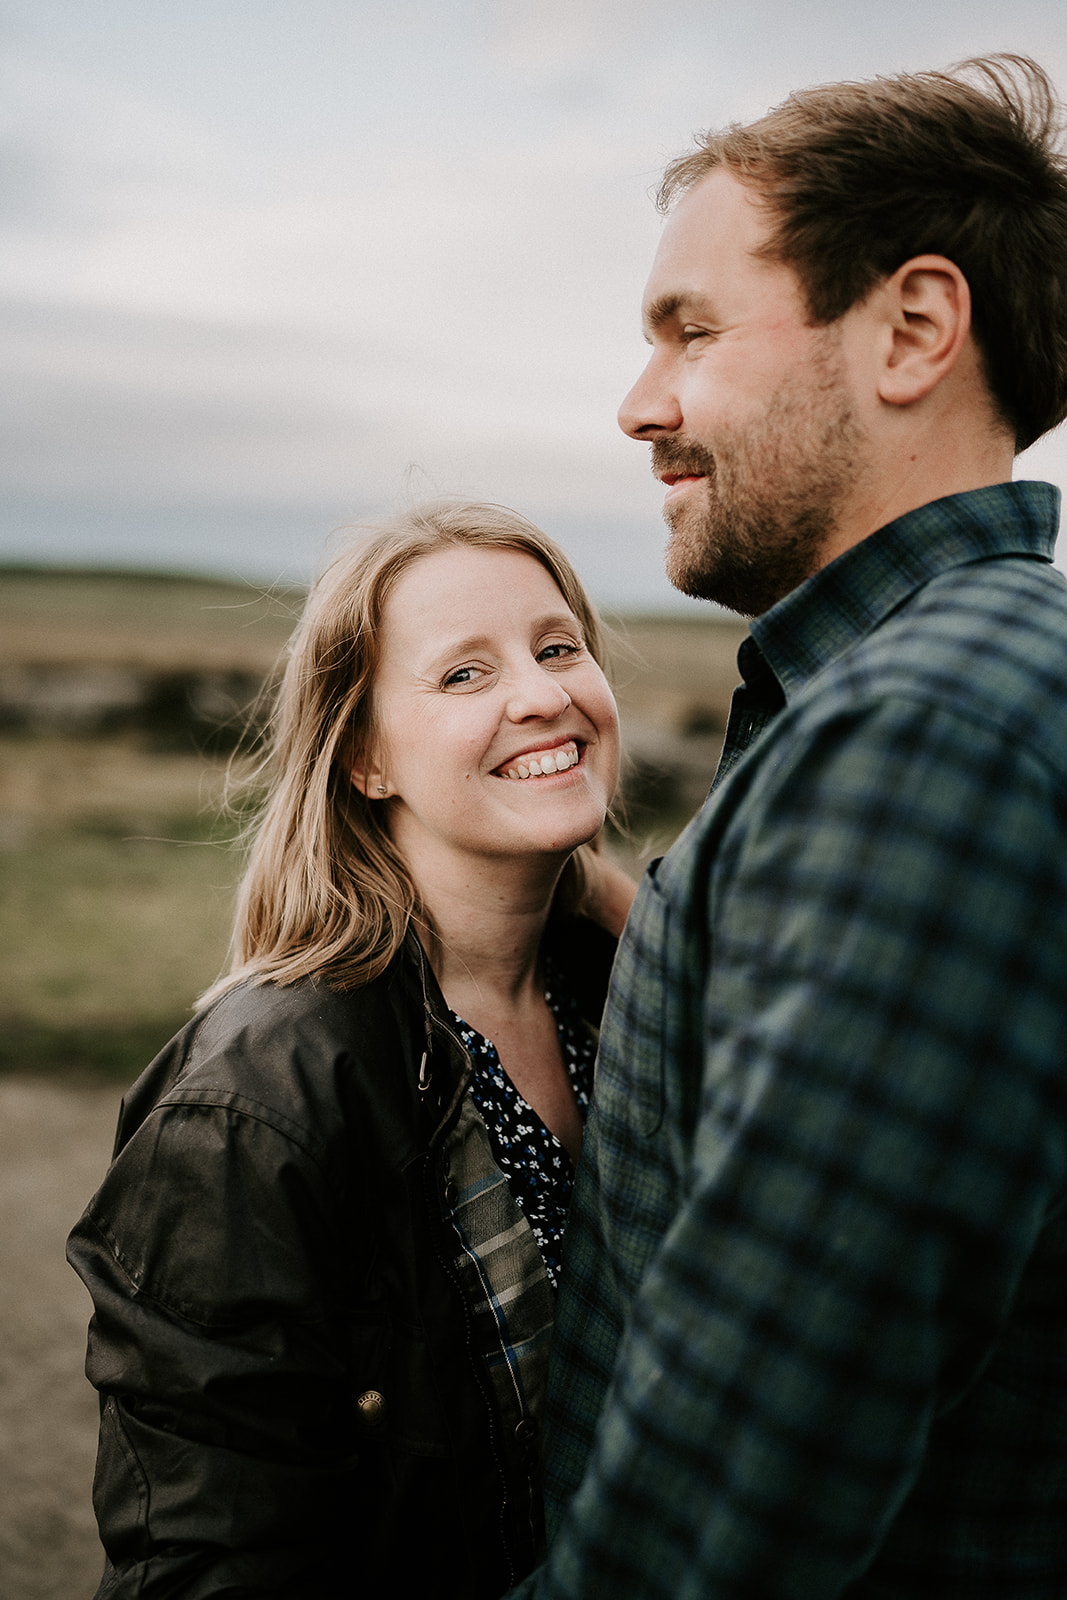 Curbar Edge Pre-Wedding Shoot in the Peak District with a dog